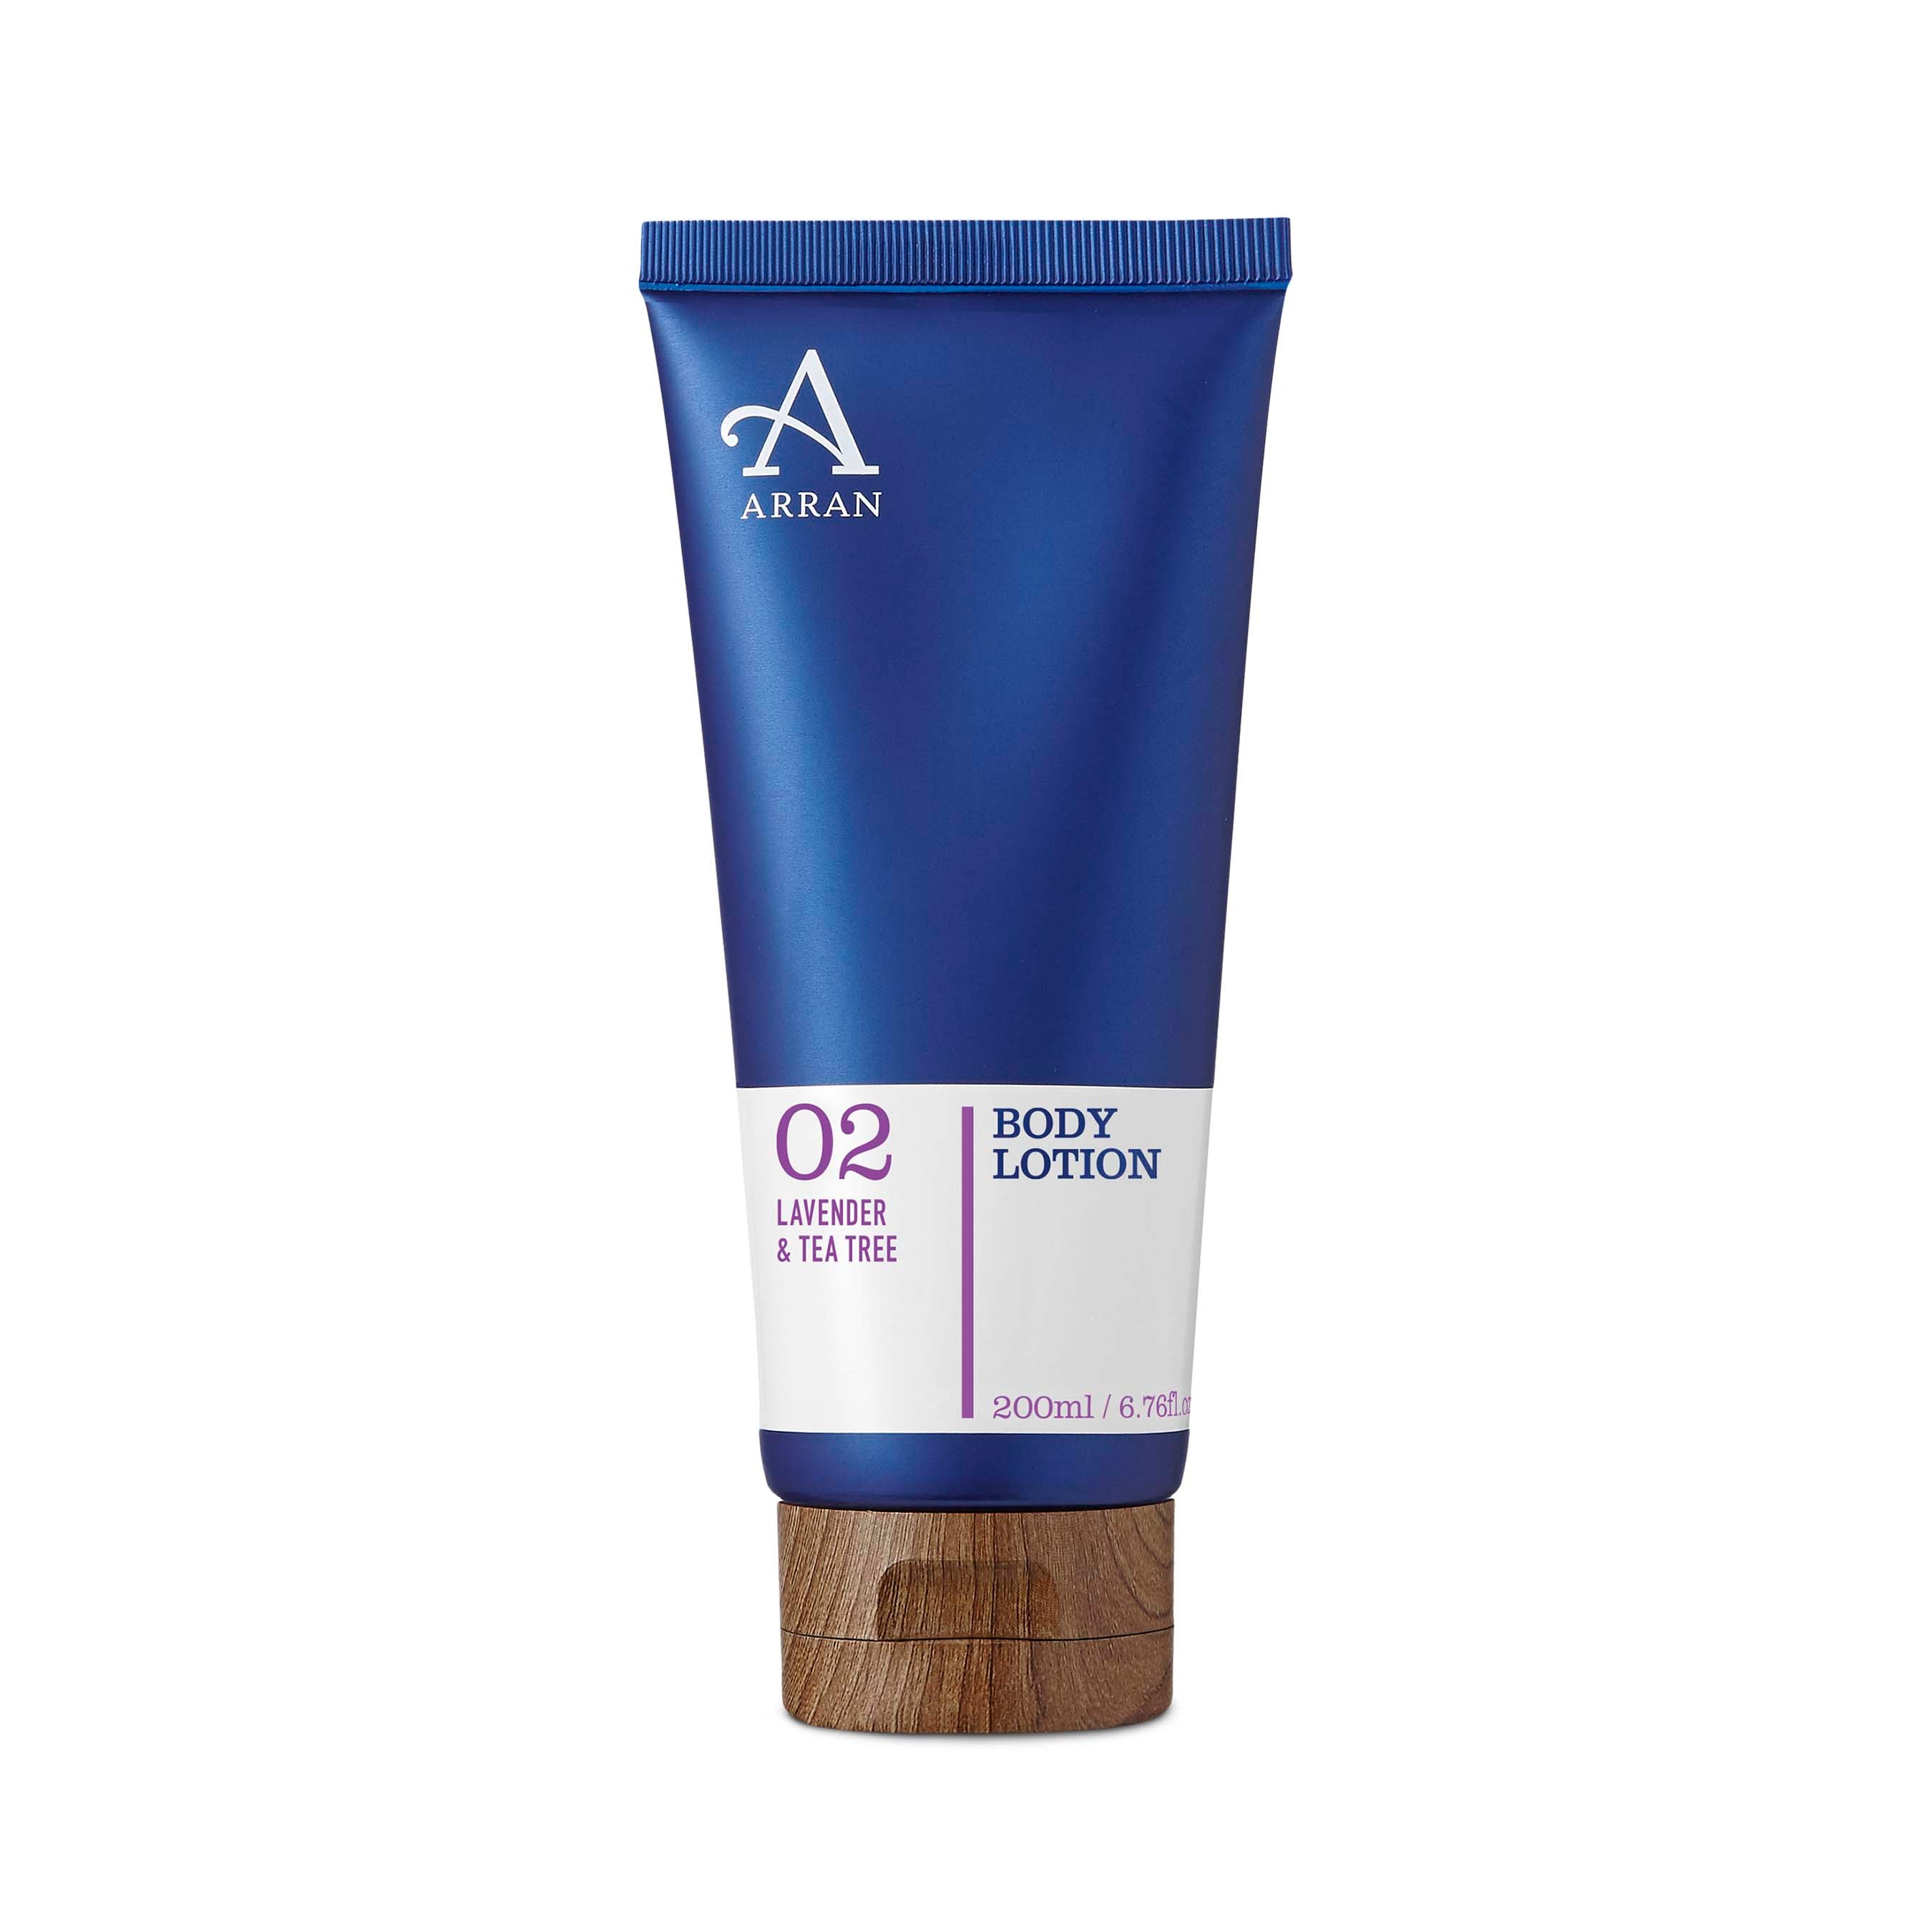 An image of ARRAN Apothecary Lavender & Tea Tree Body Lotion 200ml | Made in Scotland | Lave...